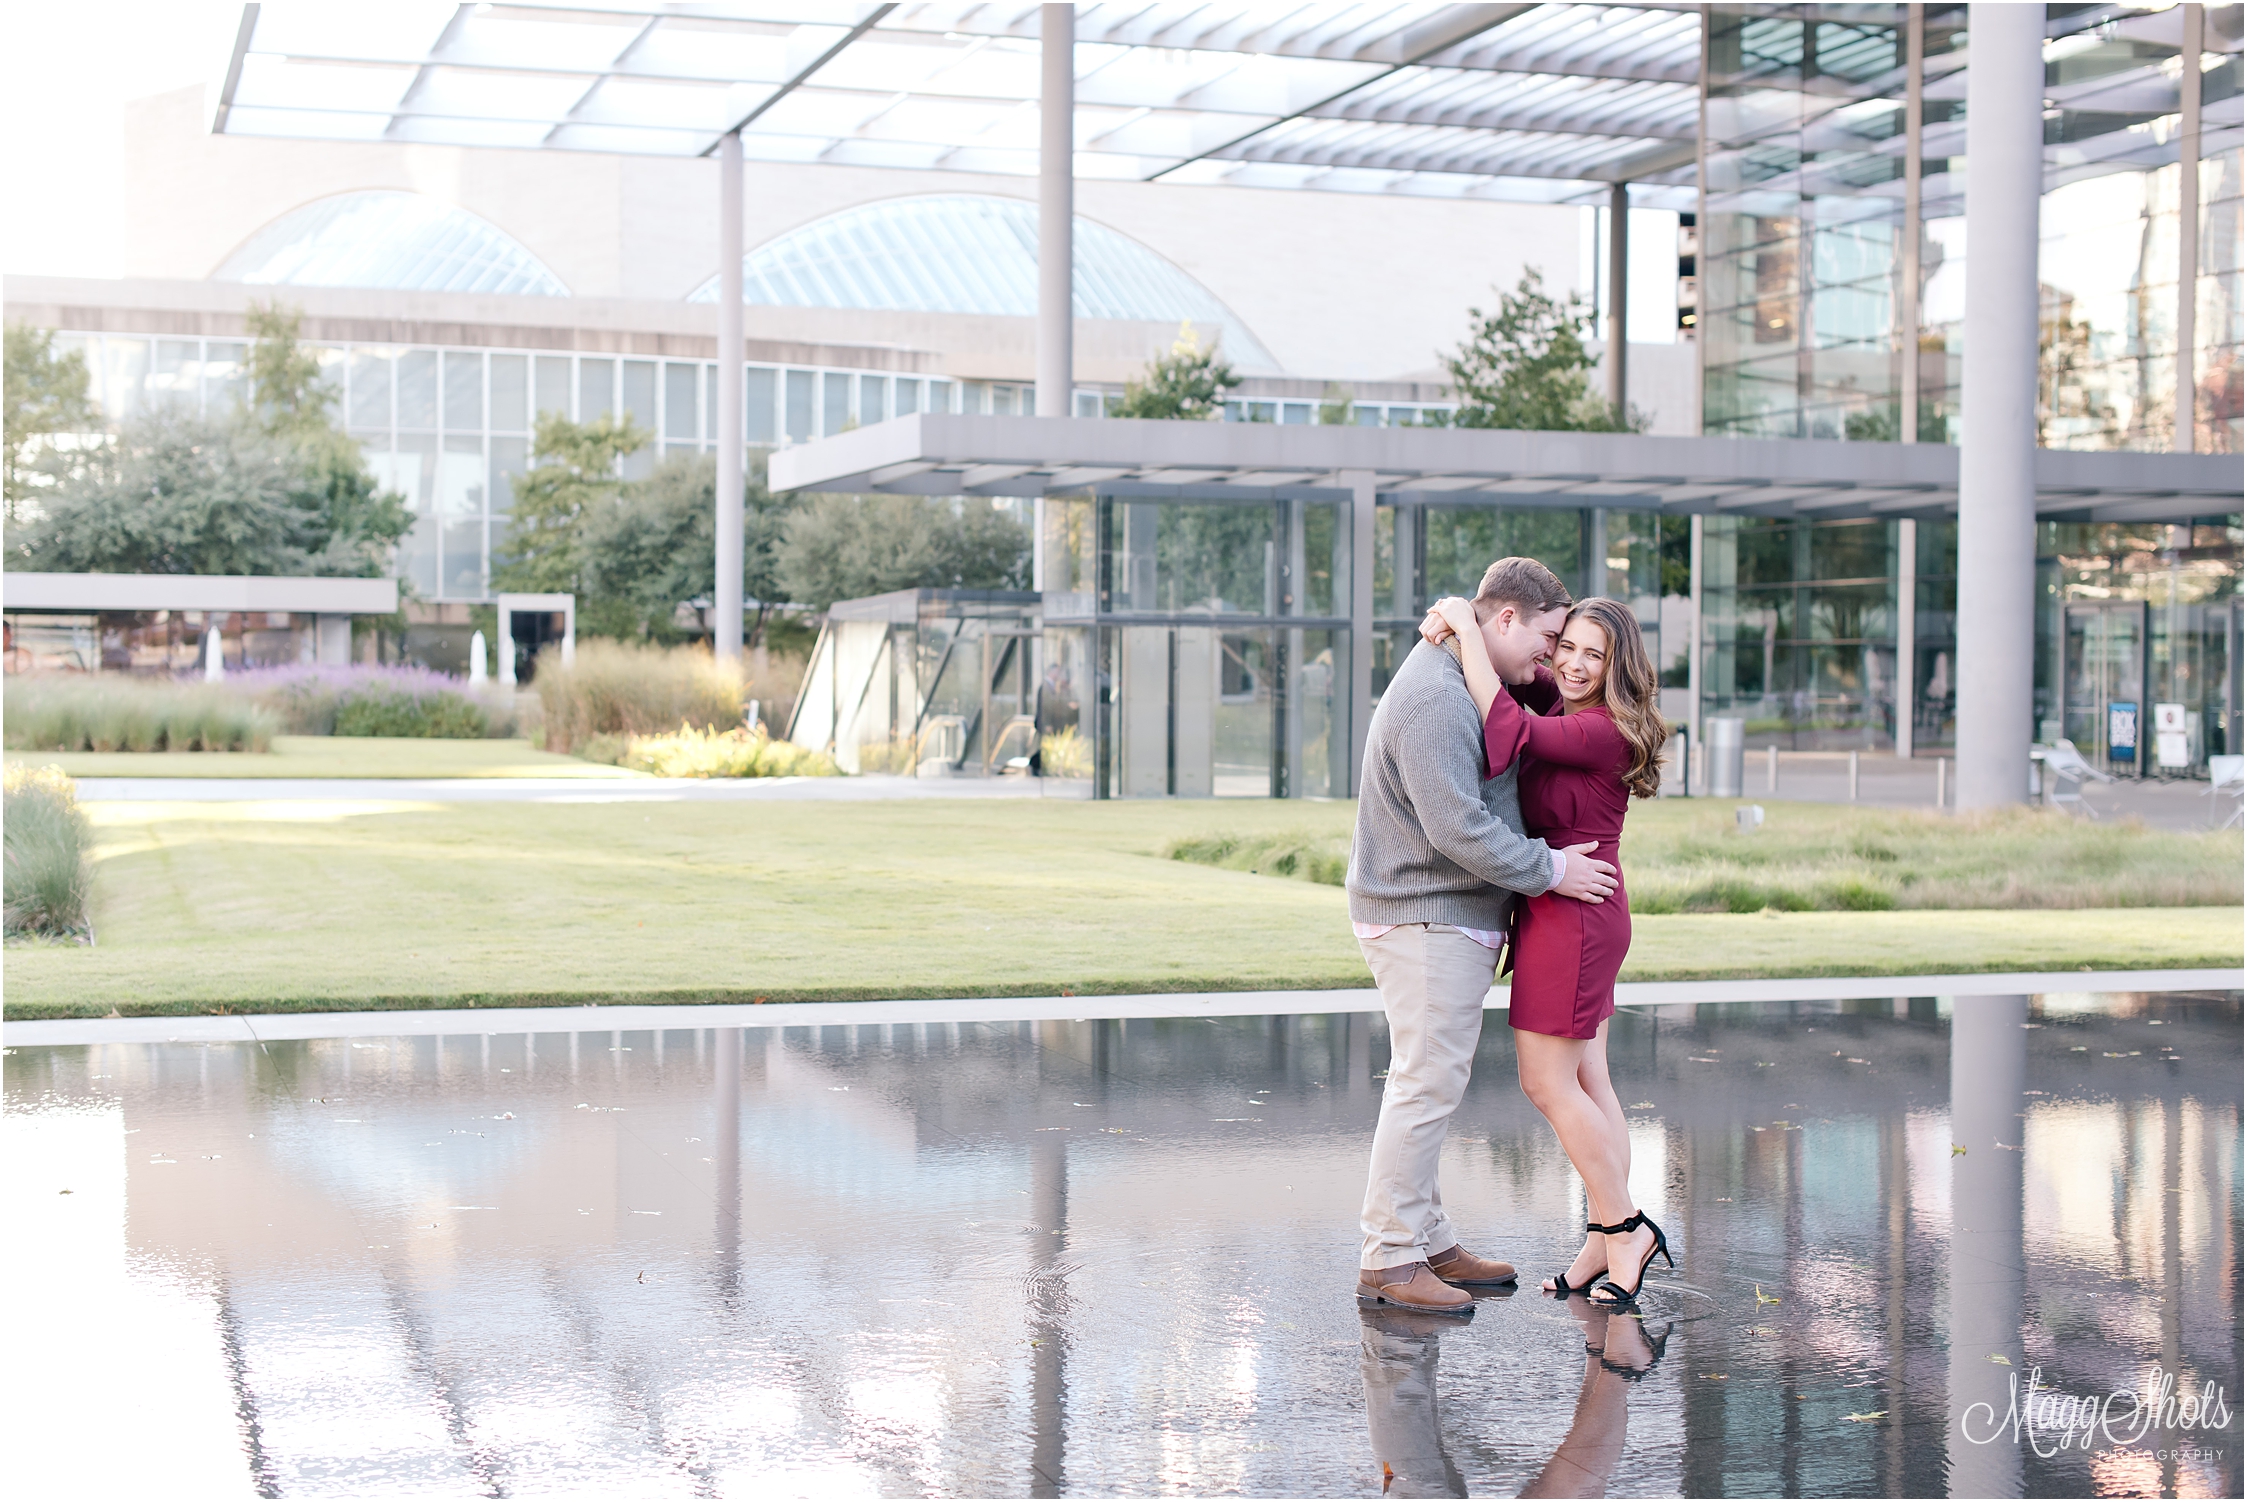 Love, Professional Photographer, Professional Photography, Winspear Opera House, Engagements, Couple, Bride and Groom, Dallas, MaggShots Photography, MaggShots